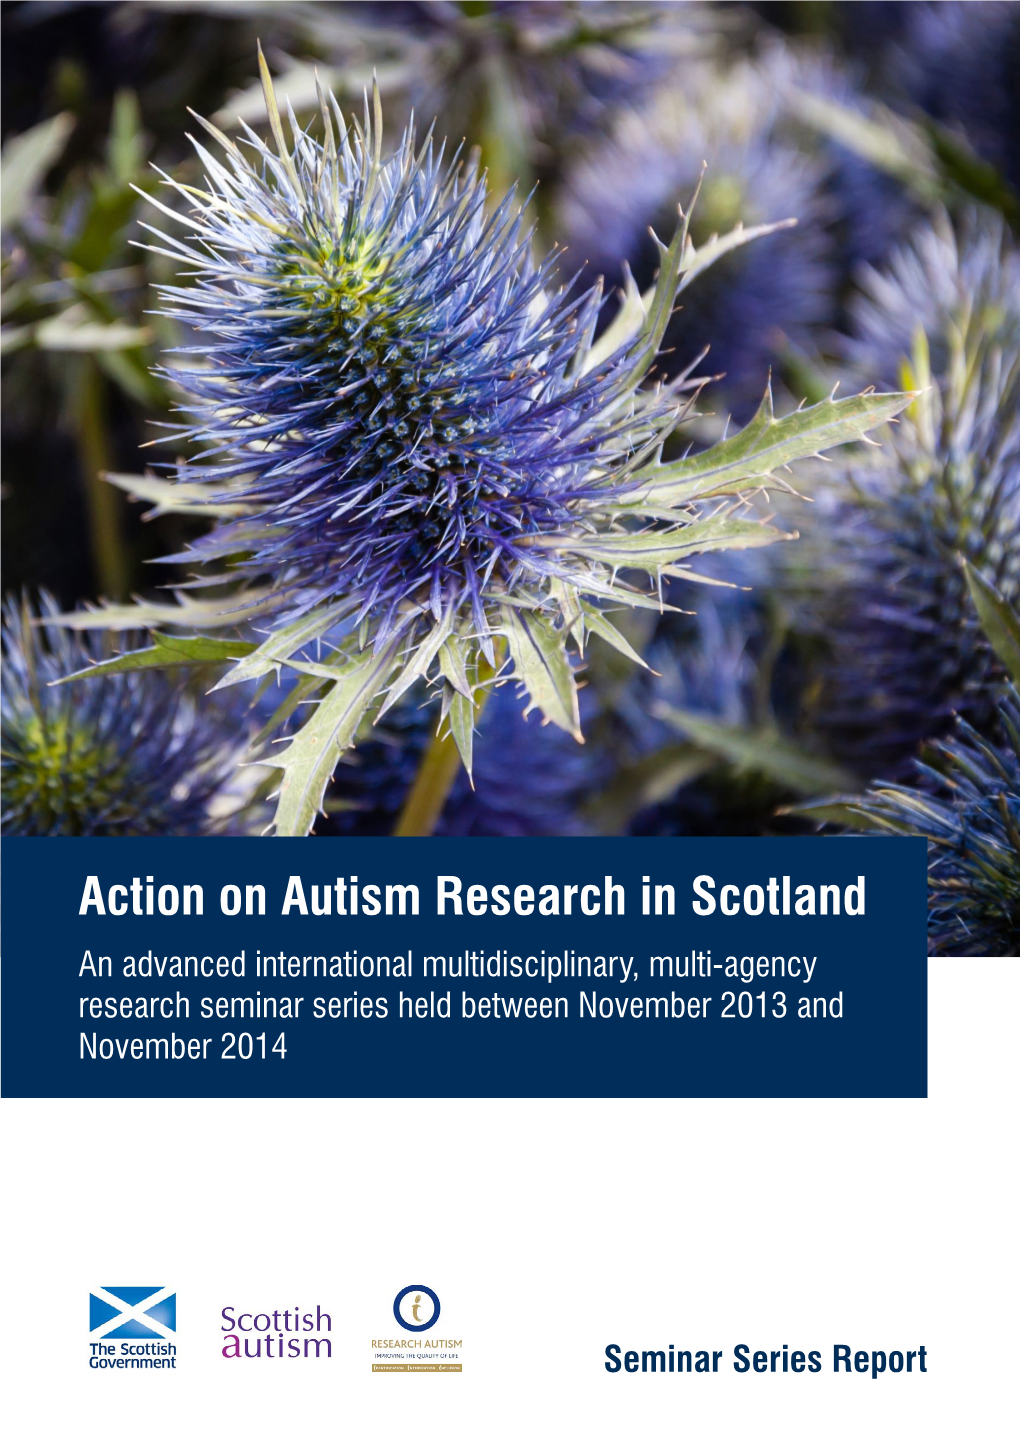 Action on Autism Research in Scotland an Advanced International Multidisciplinary, Multi-Agency Research Seminar Series Held Between November 2013 and November 2014